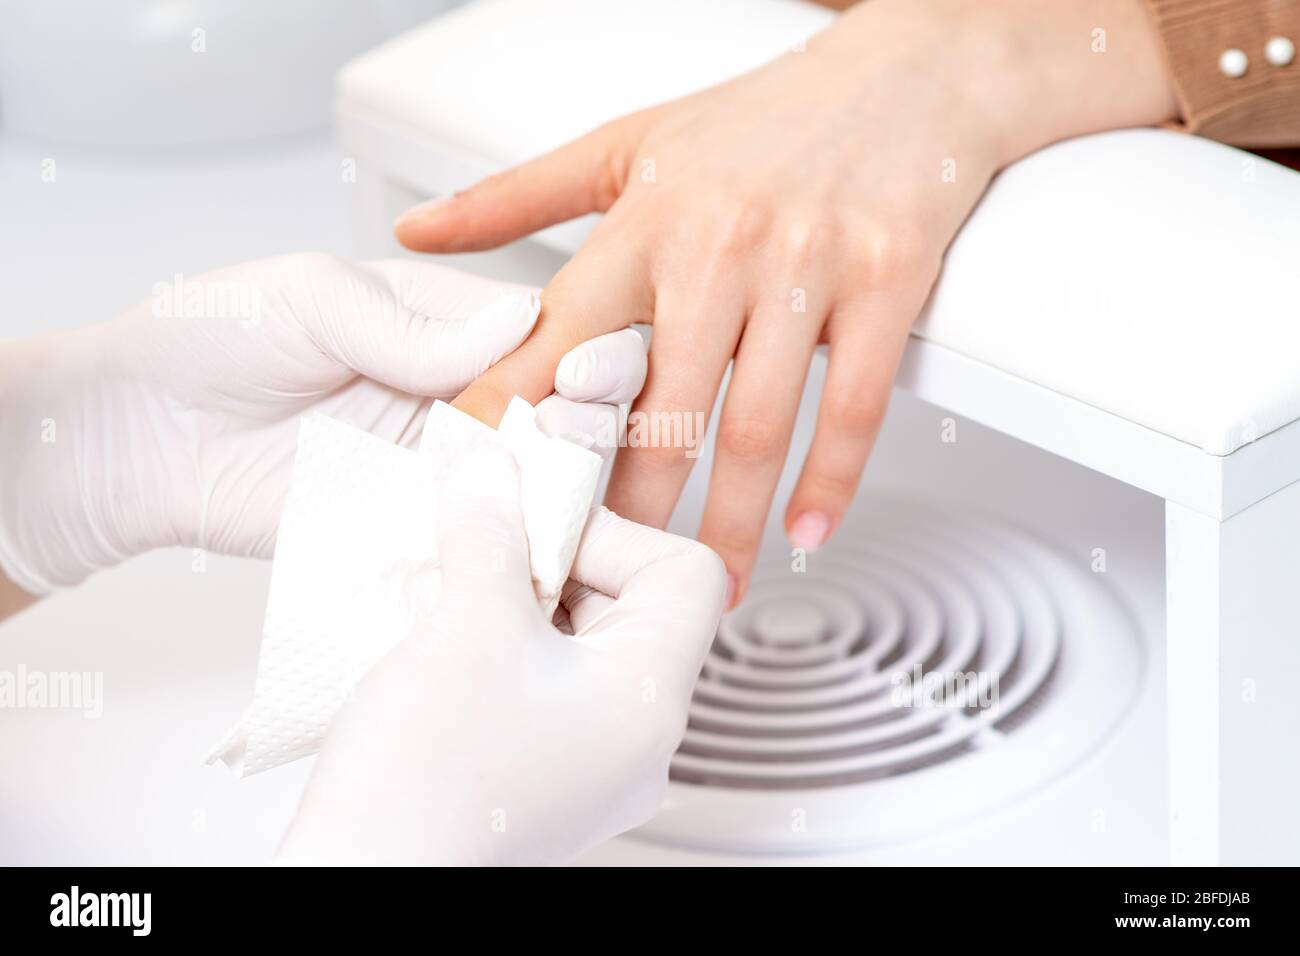 Manicure master hands are wiping the nails with a paper napkin in salon. Stock Photo